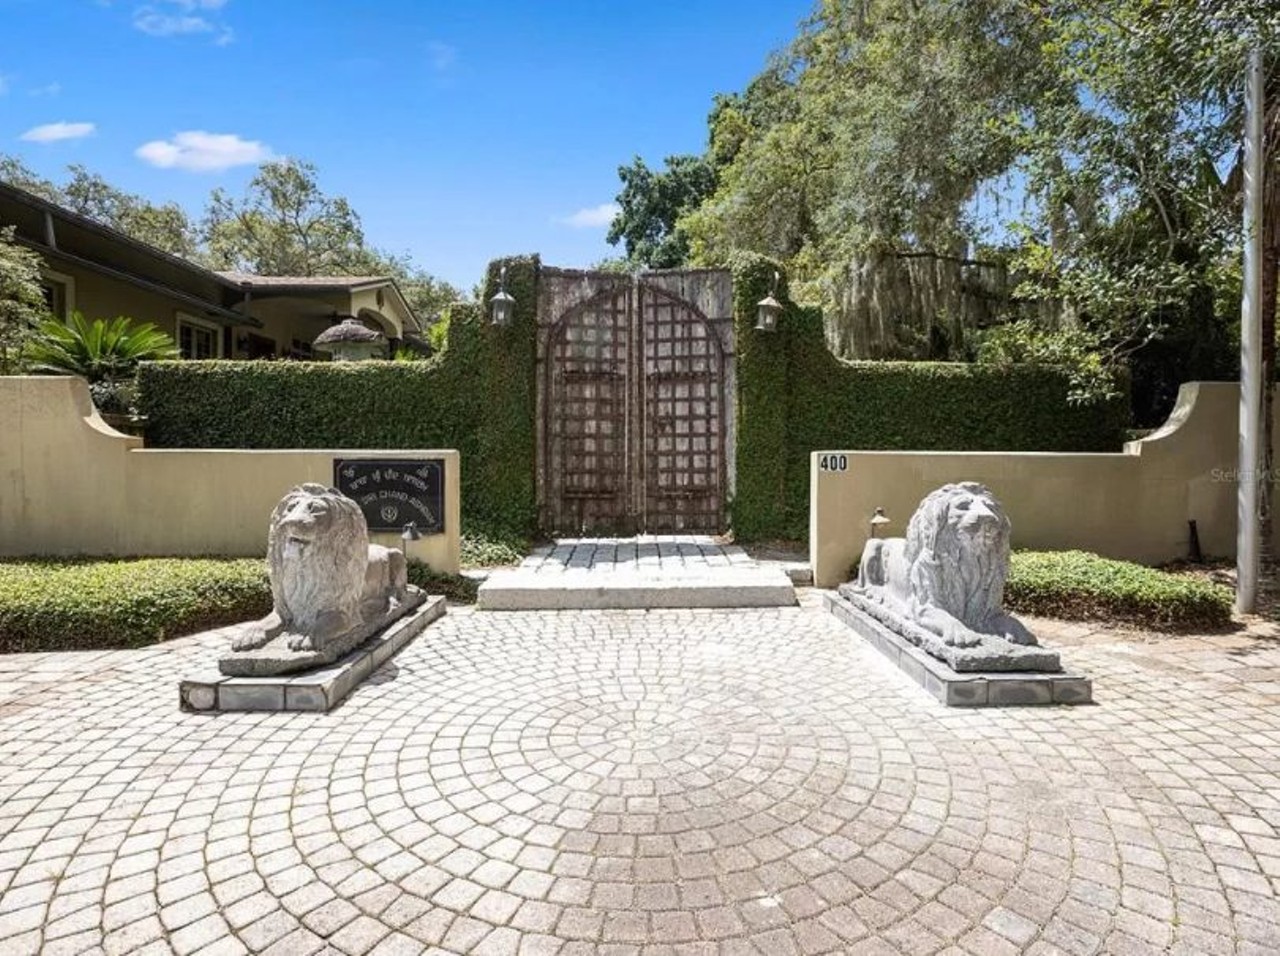 This $680K Altamonte Springs home is also a fully functional yoga retreat